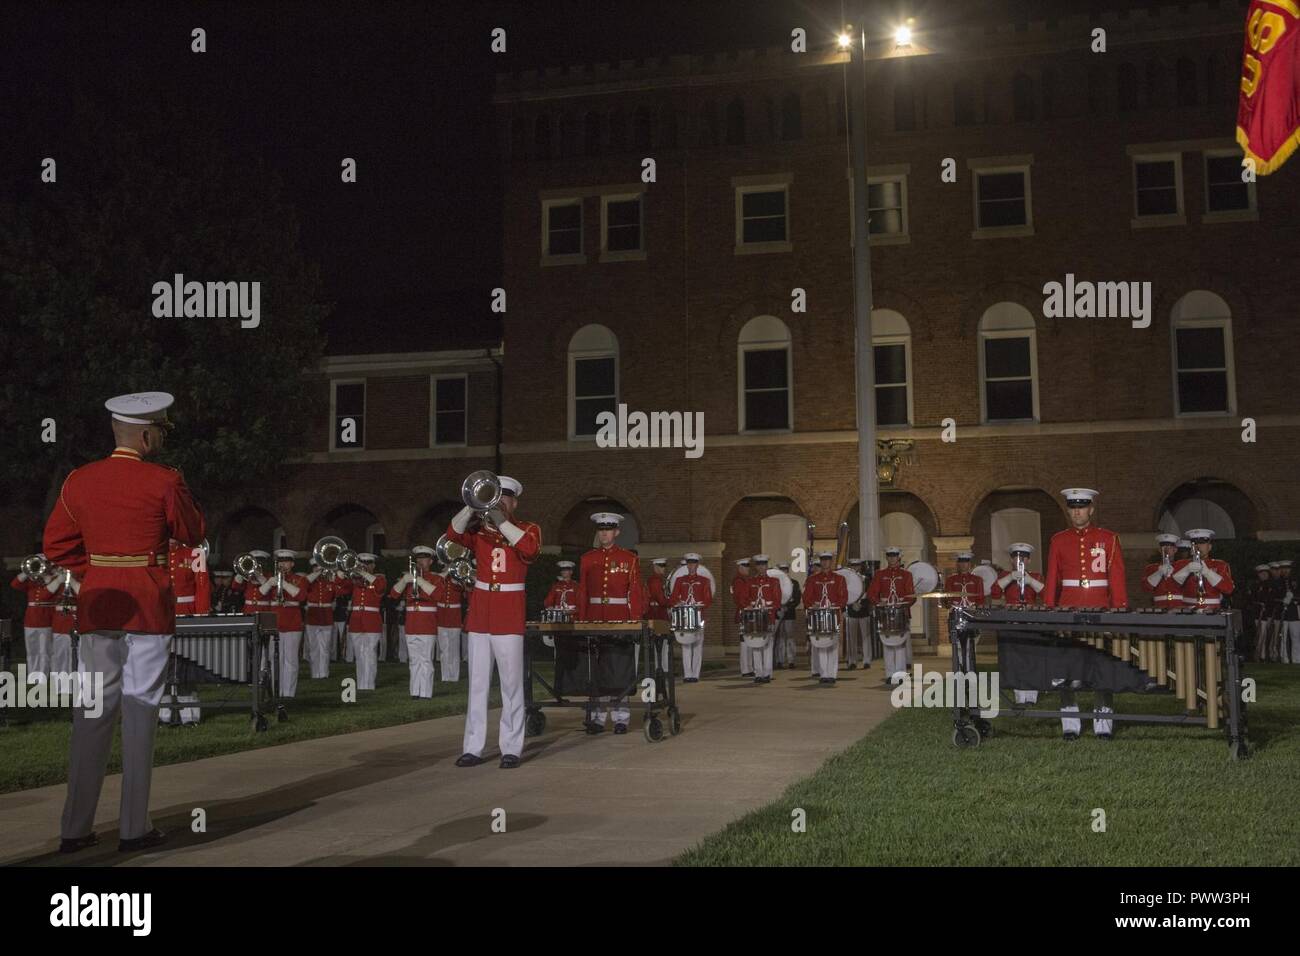 U.S. Marines with the U.S. Marine Drum and Bugle Corps perform during an evening parade at Marine Barracks Washington, Washington, D.C., June 9, 2017. Evening parades are held as a means of honoring senior officials, distinguished citizens and supporters of the Marine Corps. Stock Photo